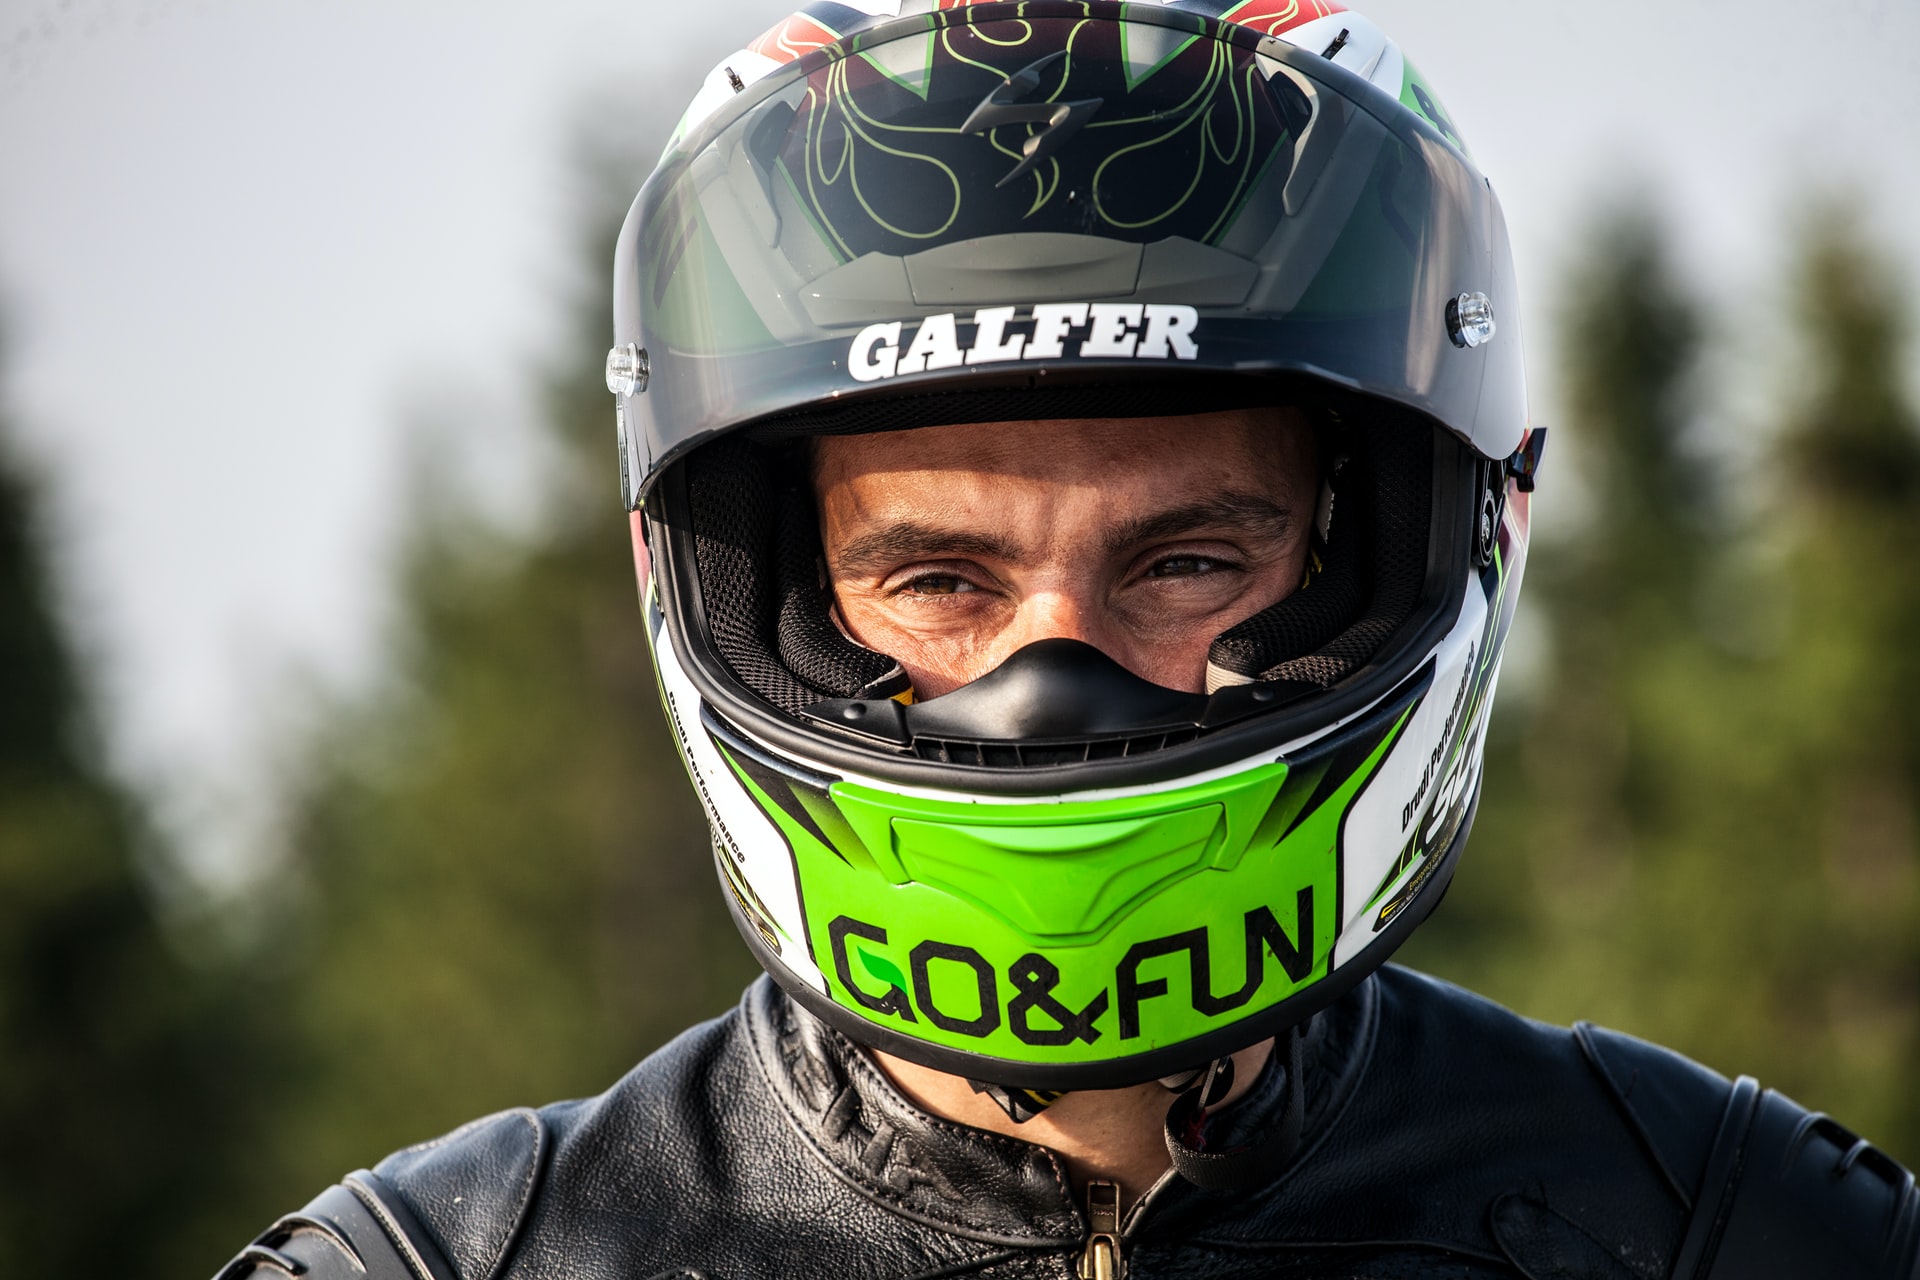 How To Mount Gopro To Motorcycle Helmet - Step-by-Step Guide with FAQs,